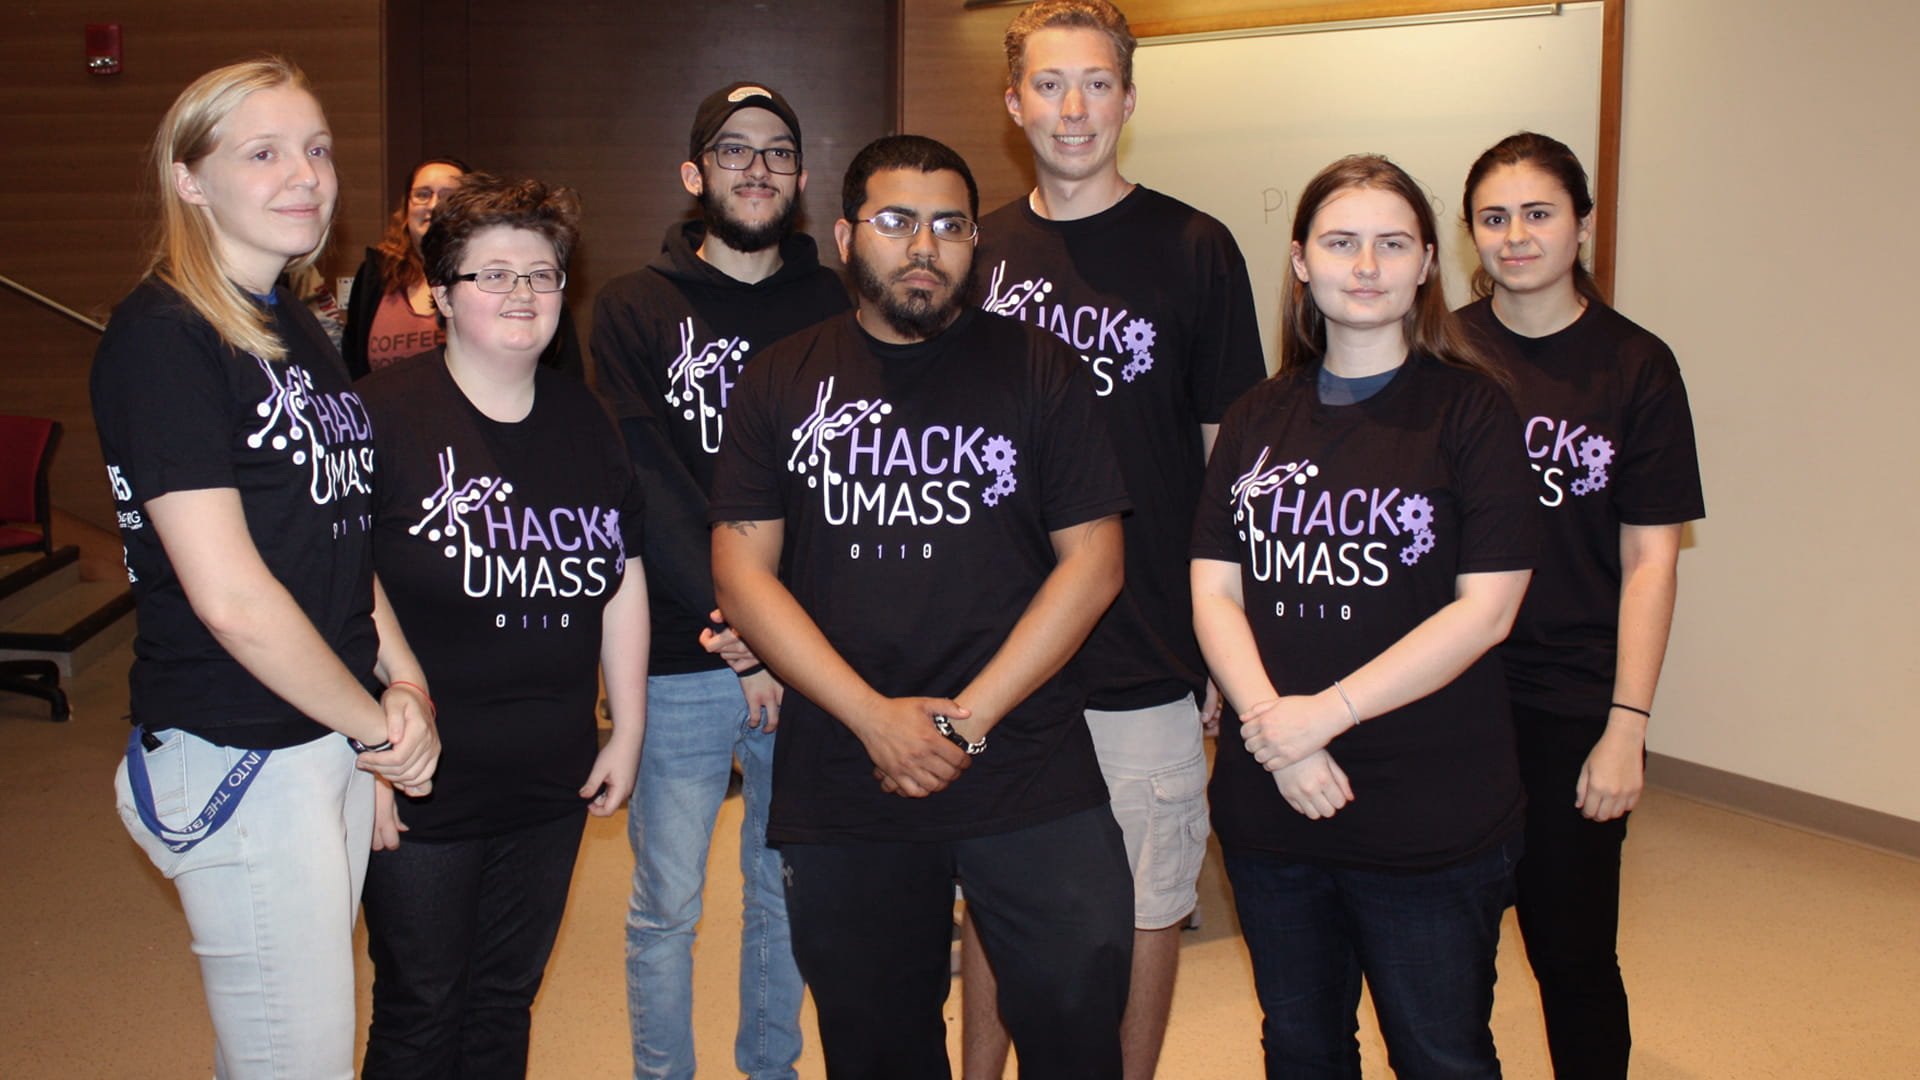 JWU students pose for a photo during HackUMass VI at UMass Amherst.